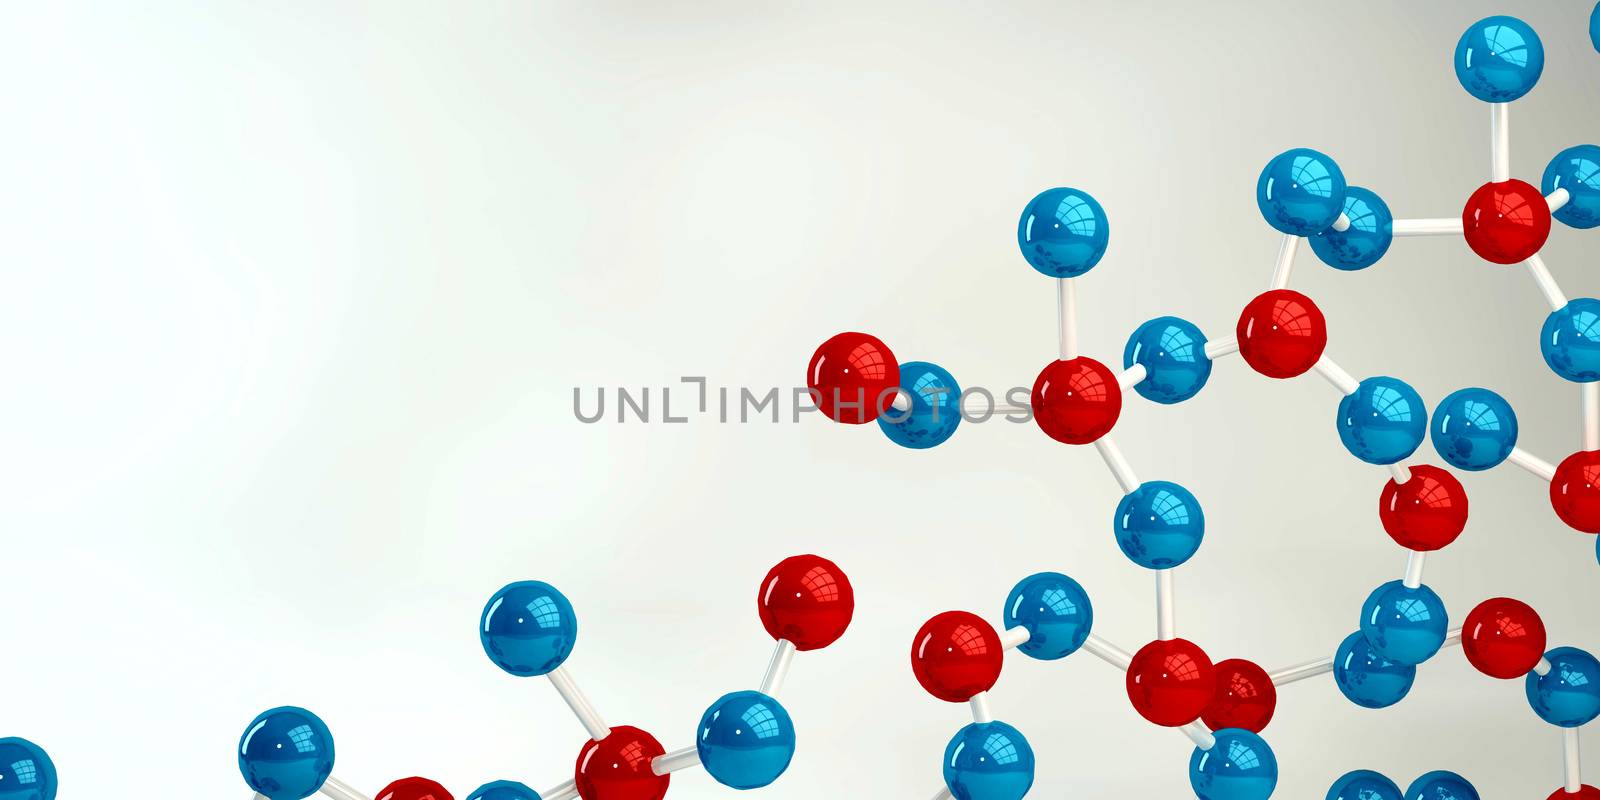 Abstract Molecules Design Background in Blue and Red